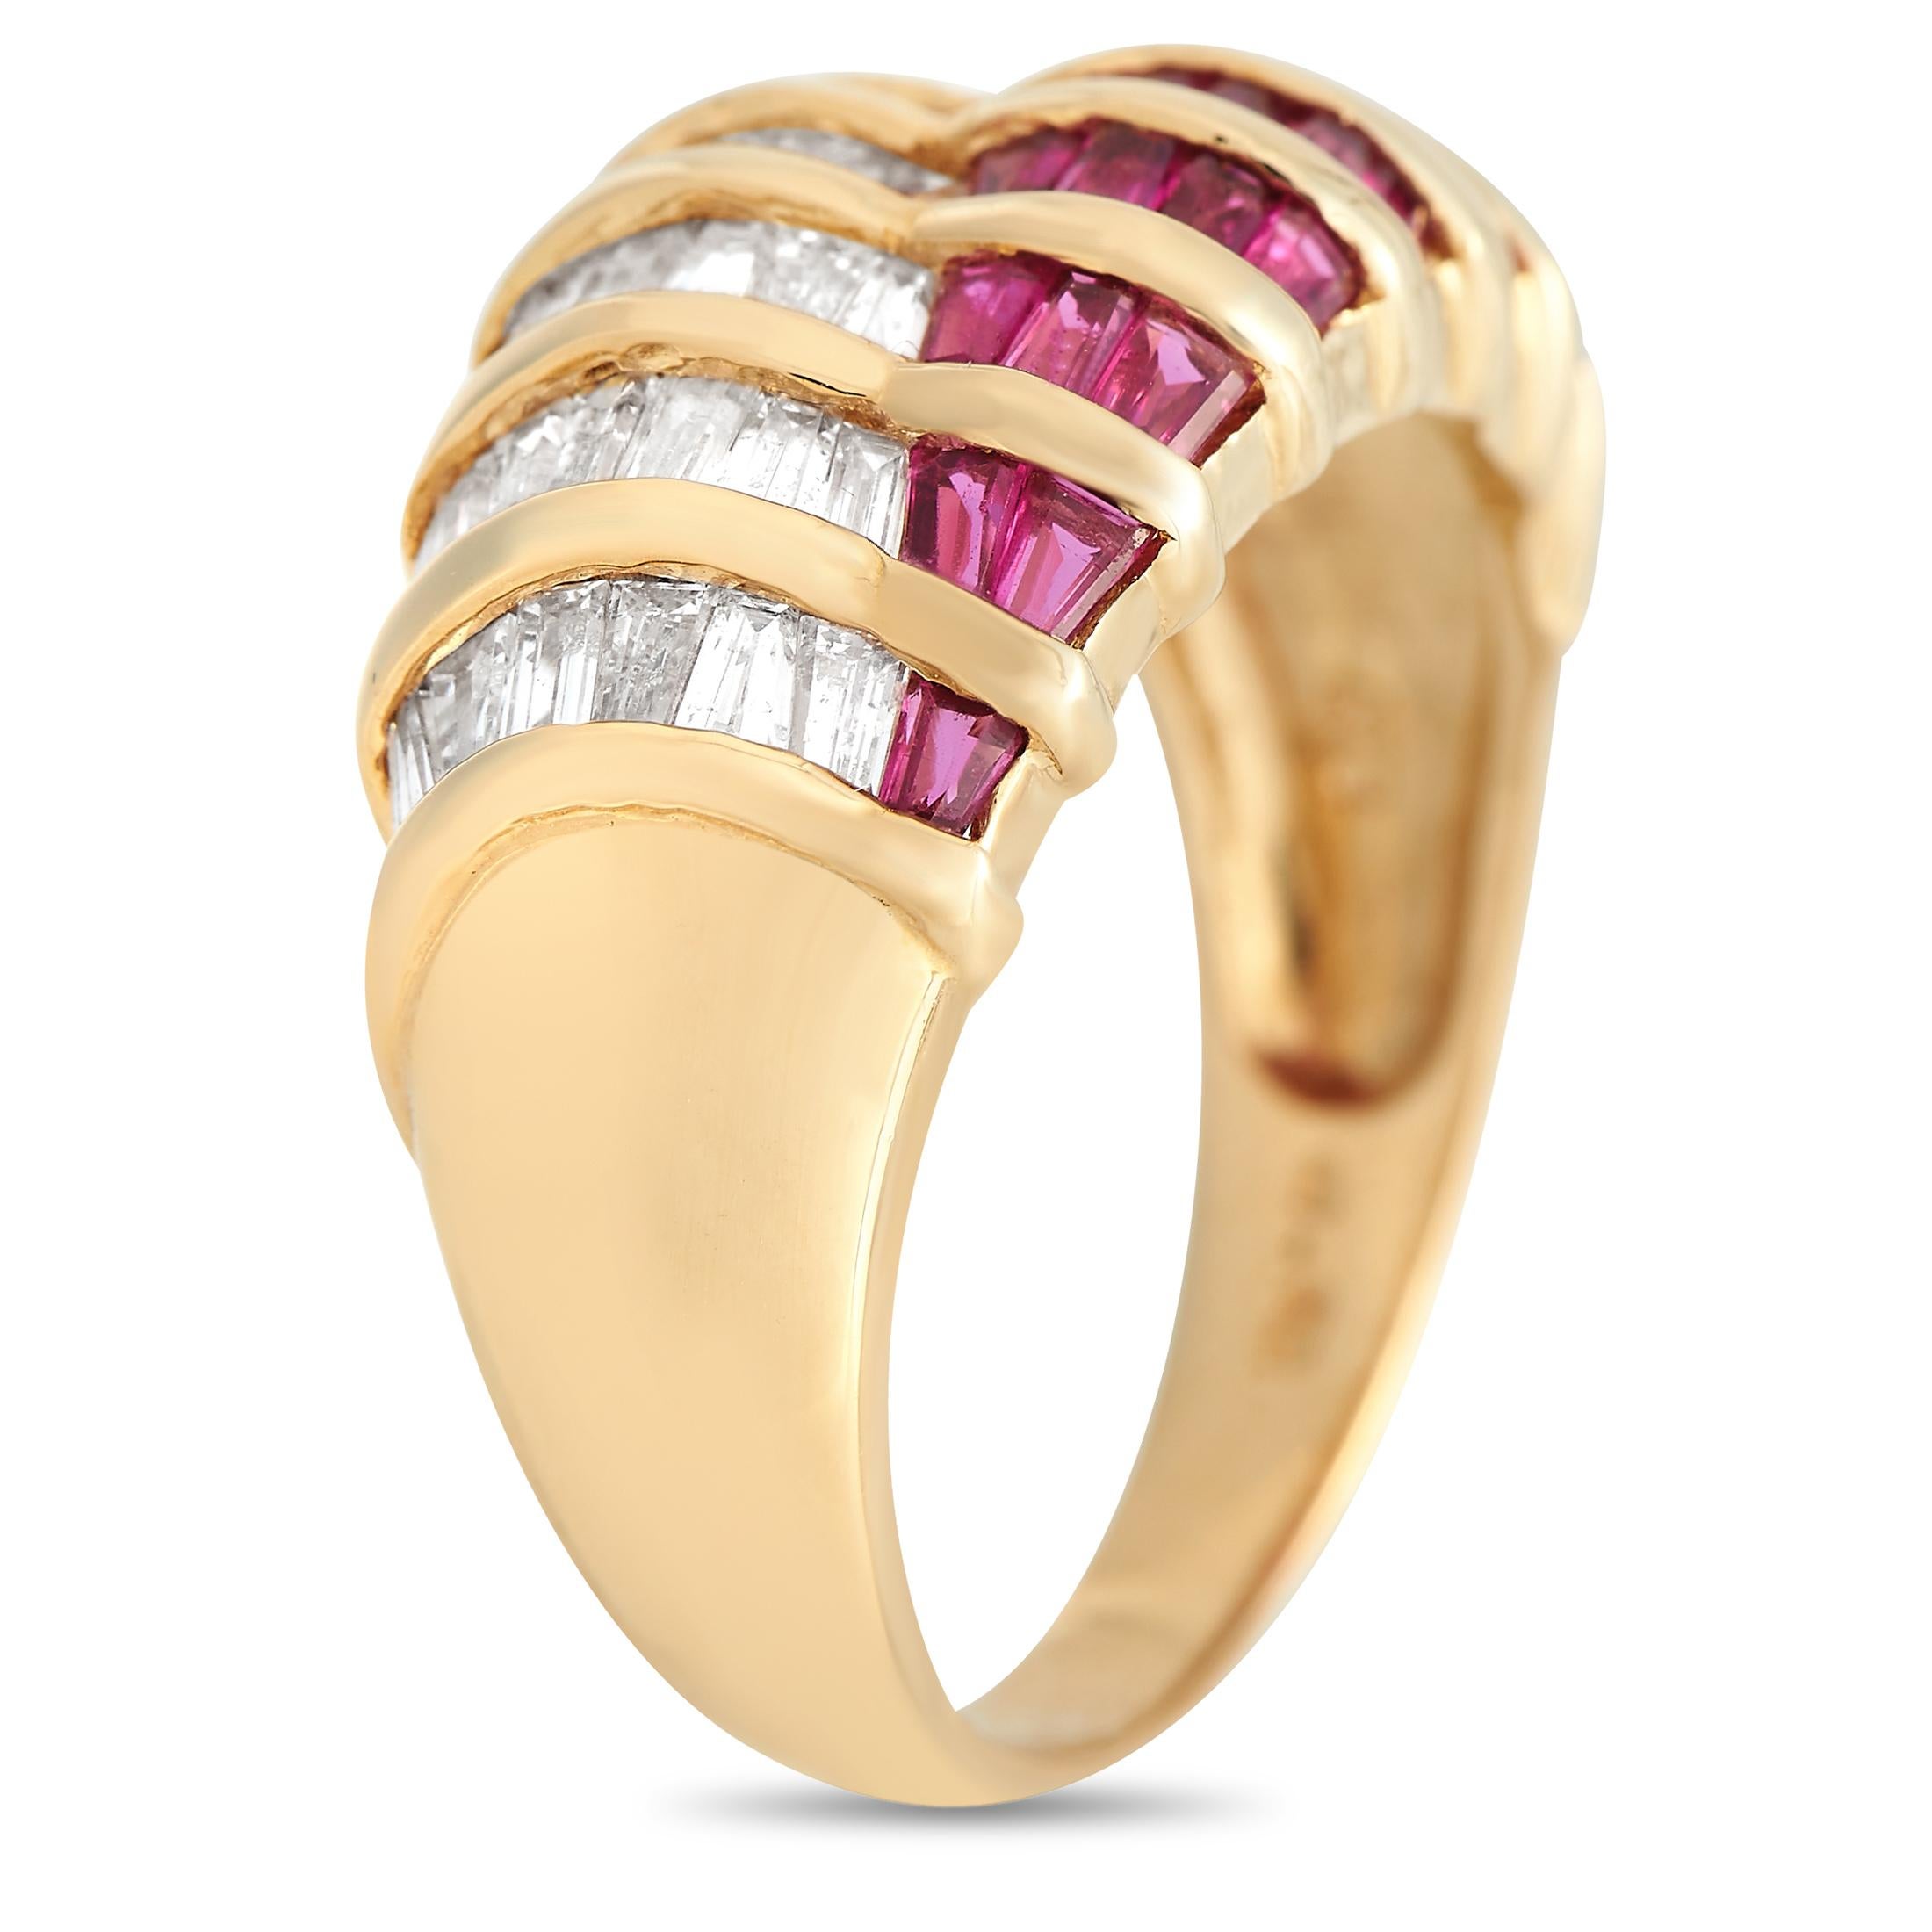 Sparkling Diamond baguettes totaling 0.50 carats and Rubies totaling 0.50 carats are perfectly juxtaposed on this exquisite luxury ring. This piece\u2019s sleek 18K Yellow Gold setting features a band width and top height measuring 3mm, making it an